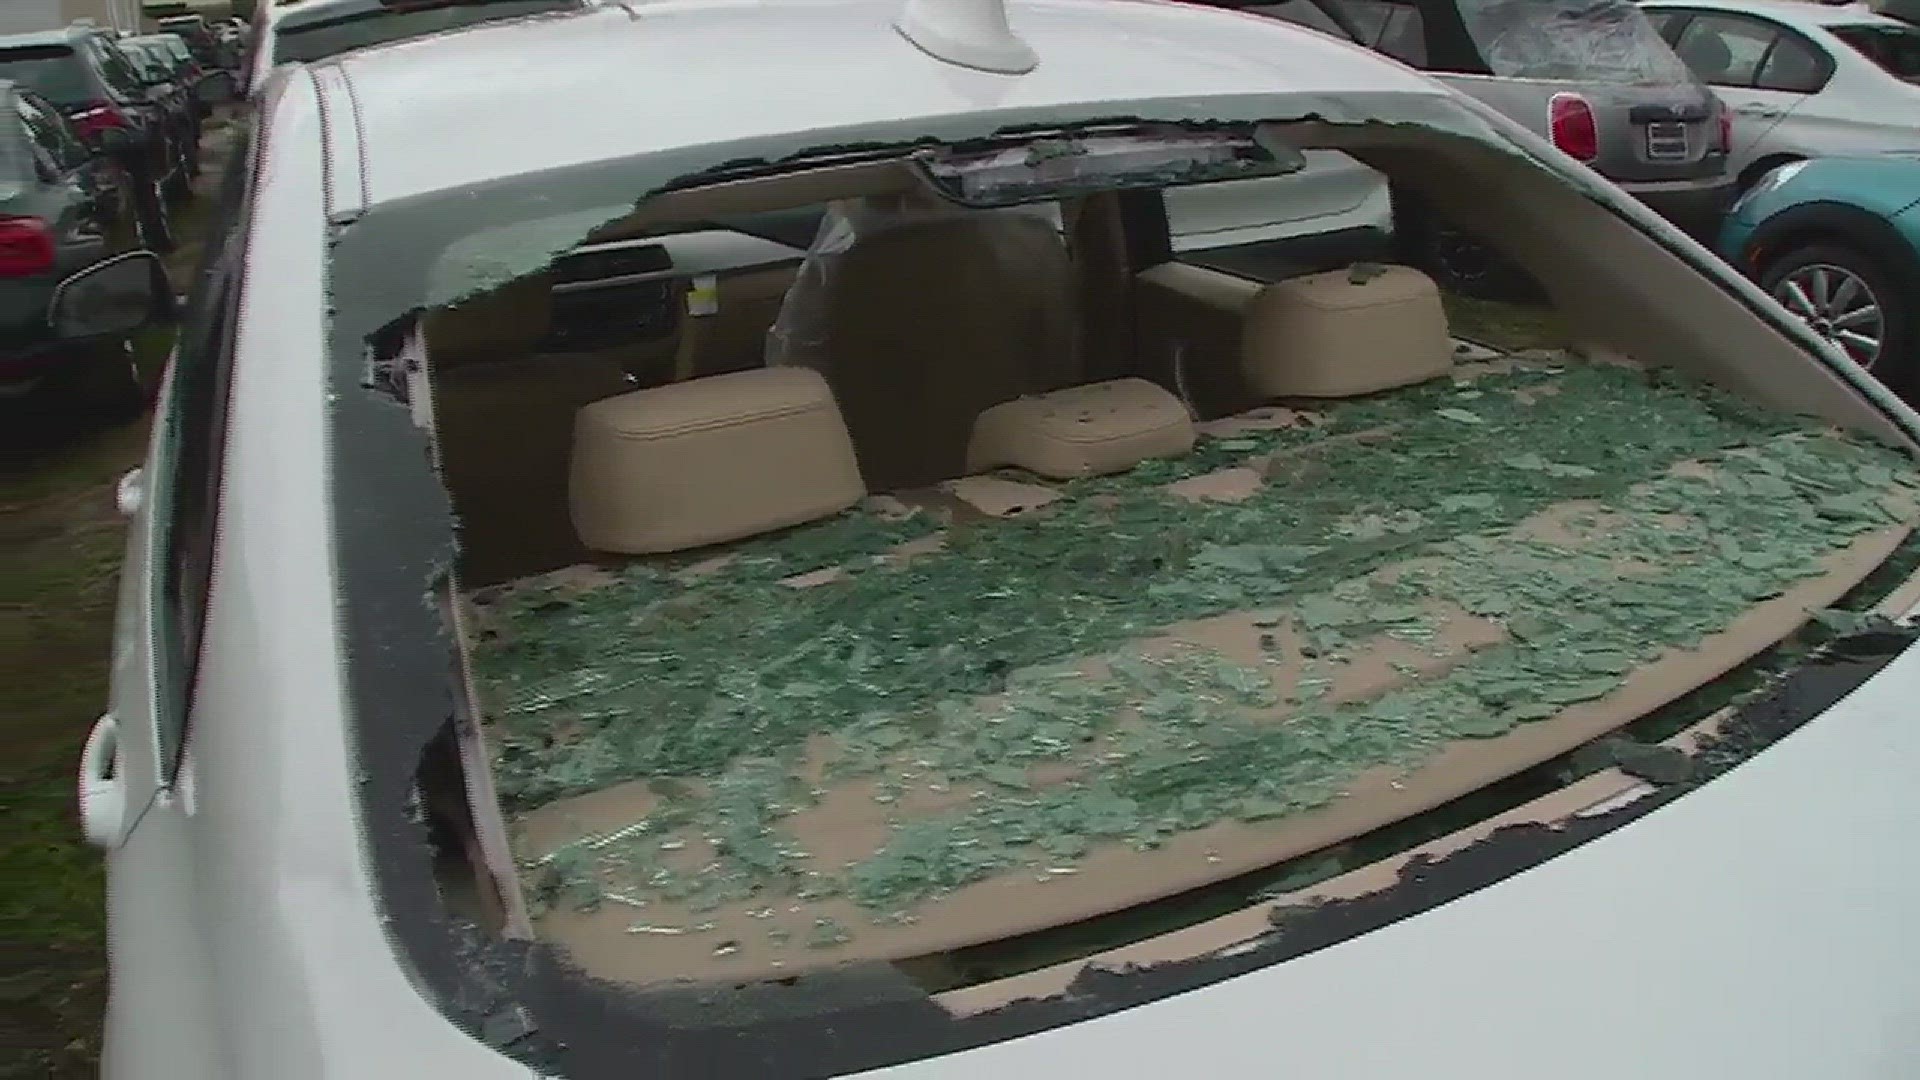 Hail Sale' in the Works After Storm Damages Cars at Dealerships